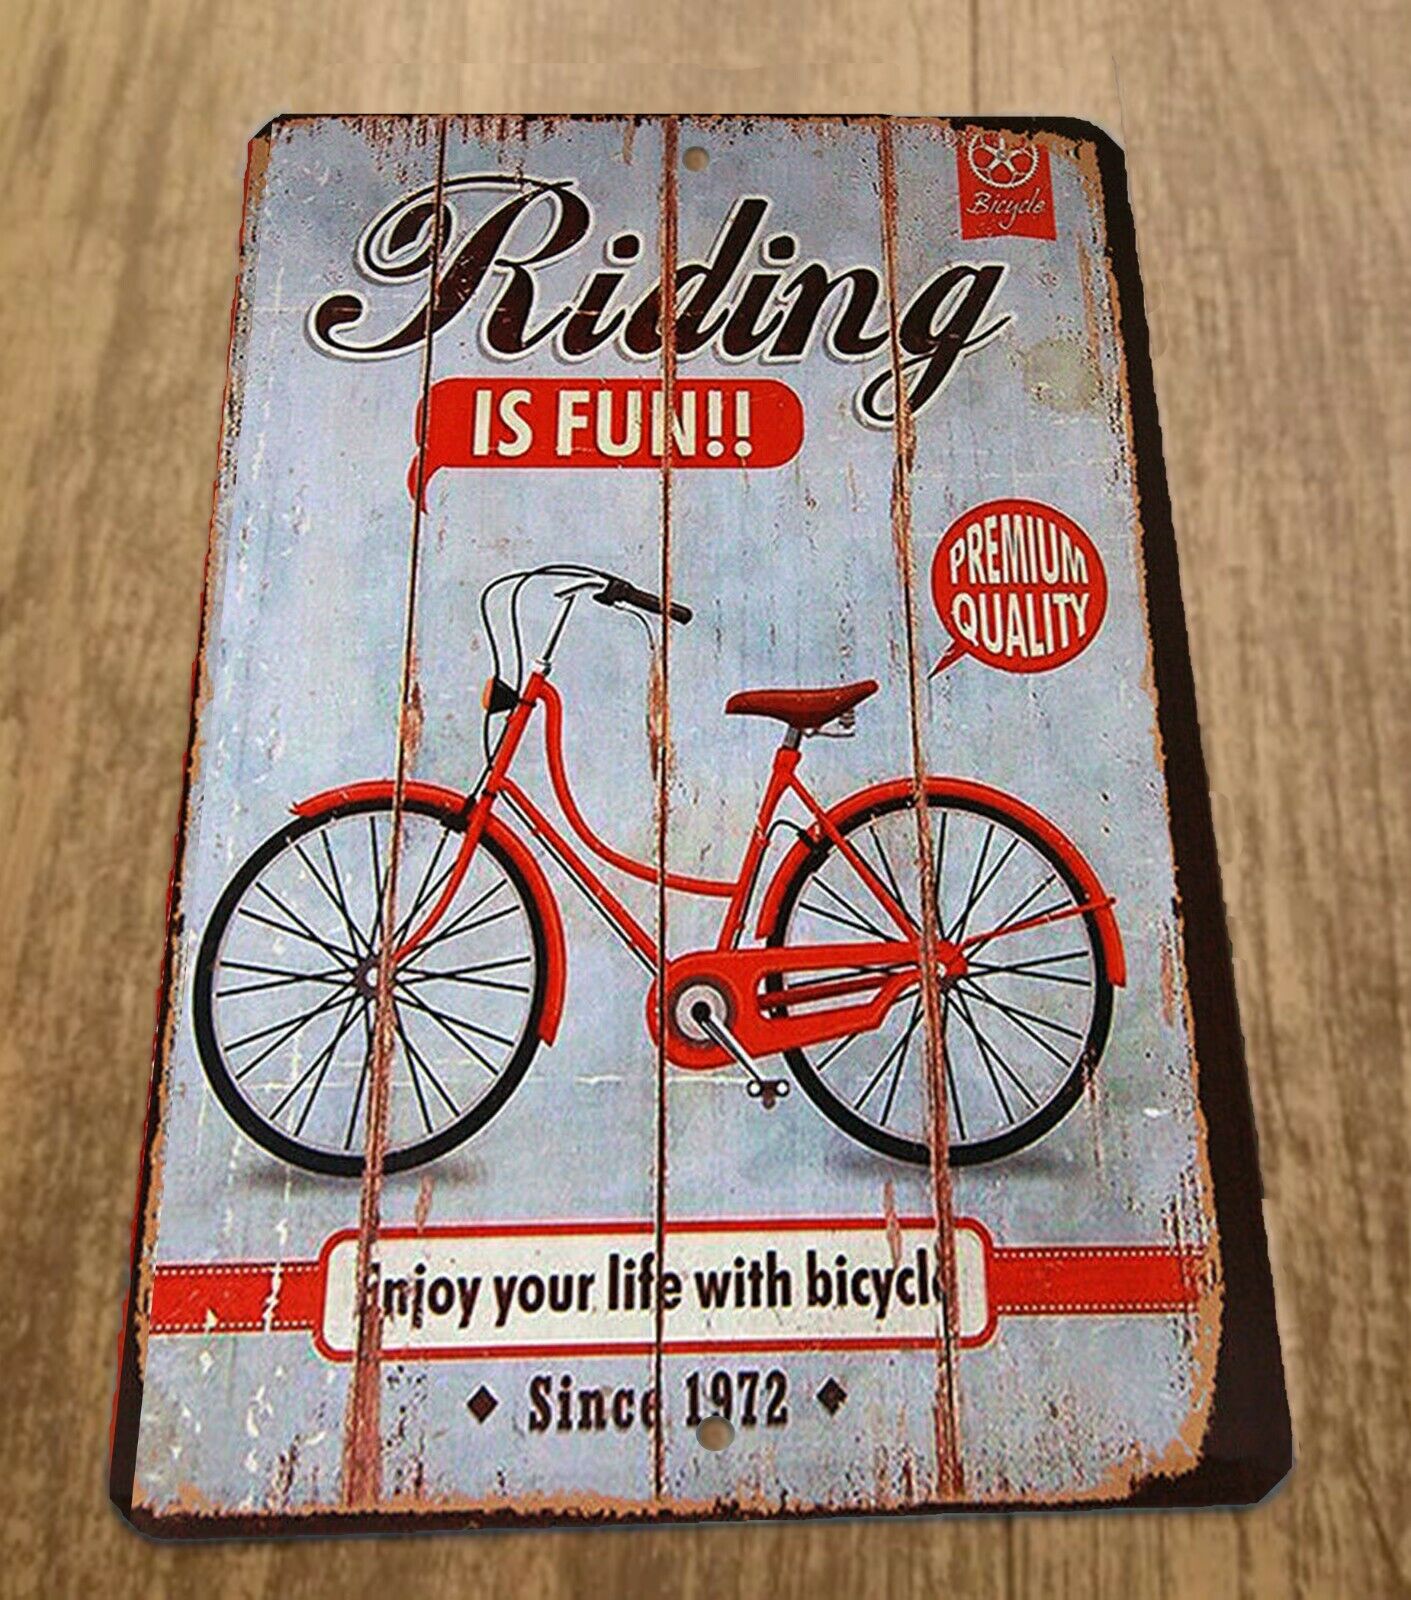 Bicycle Riding is Fun Outdoors 8x12 Metal Wall Vintage Misc Poster Sign